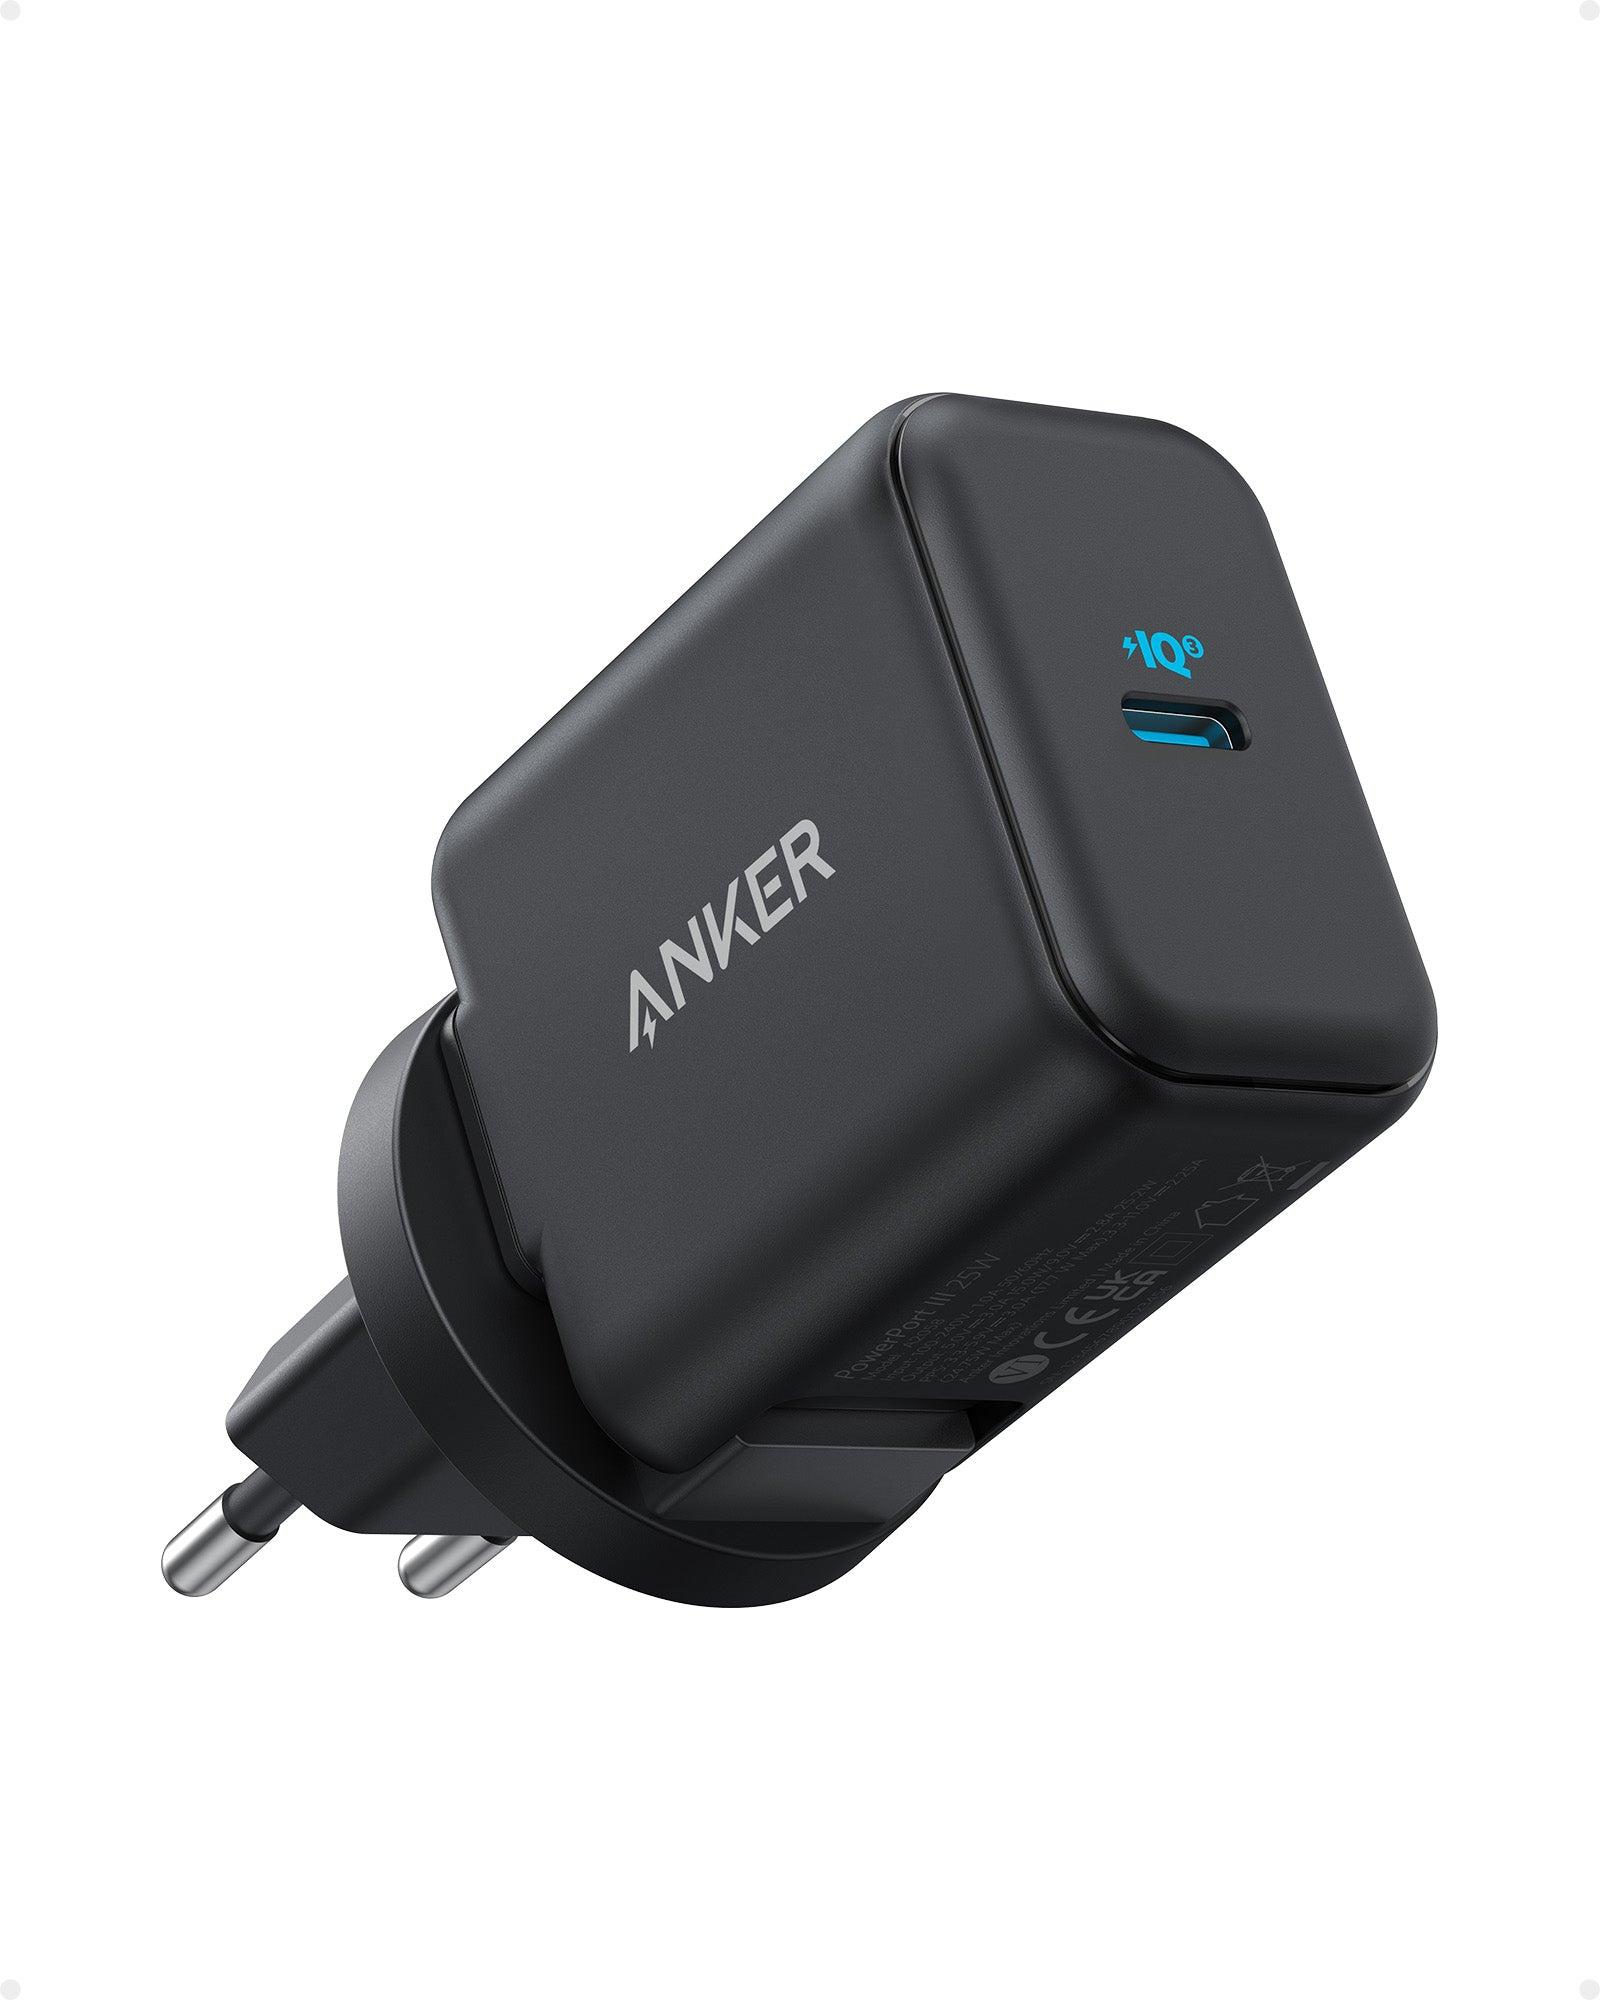 Anker <b>312</b> Charger (Ace, 25W)